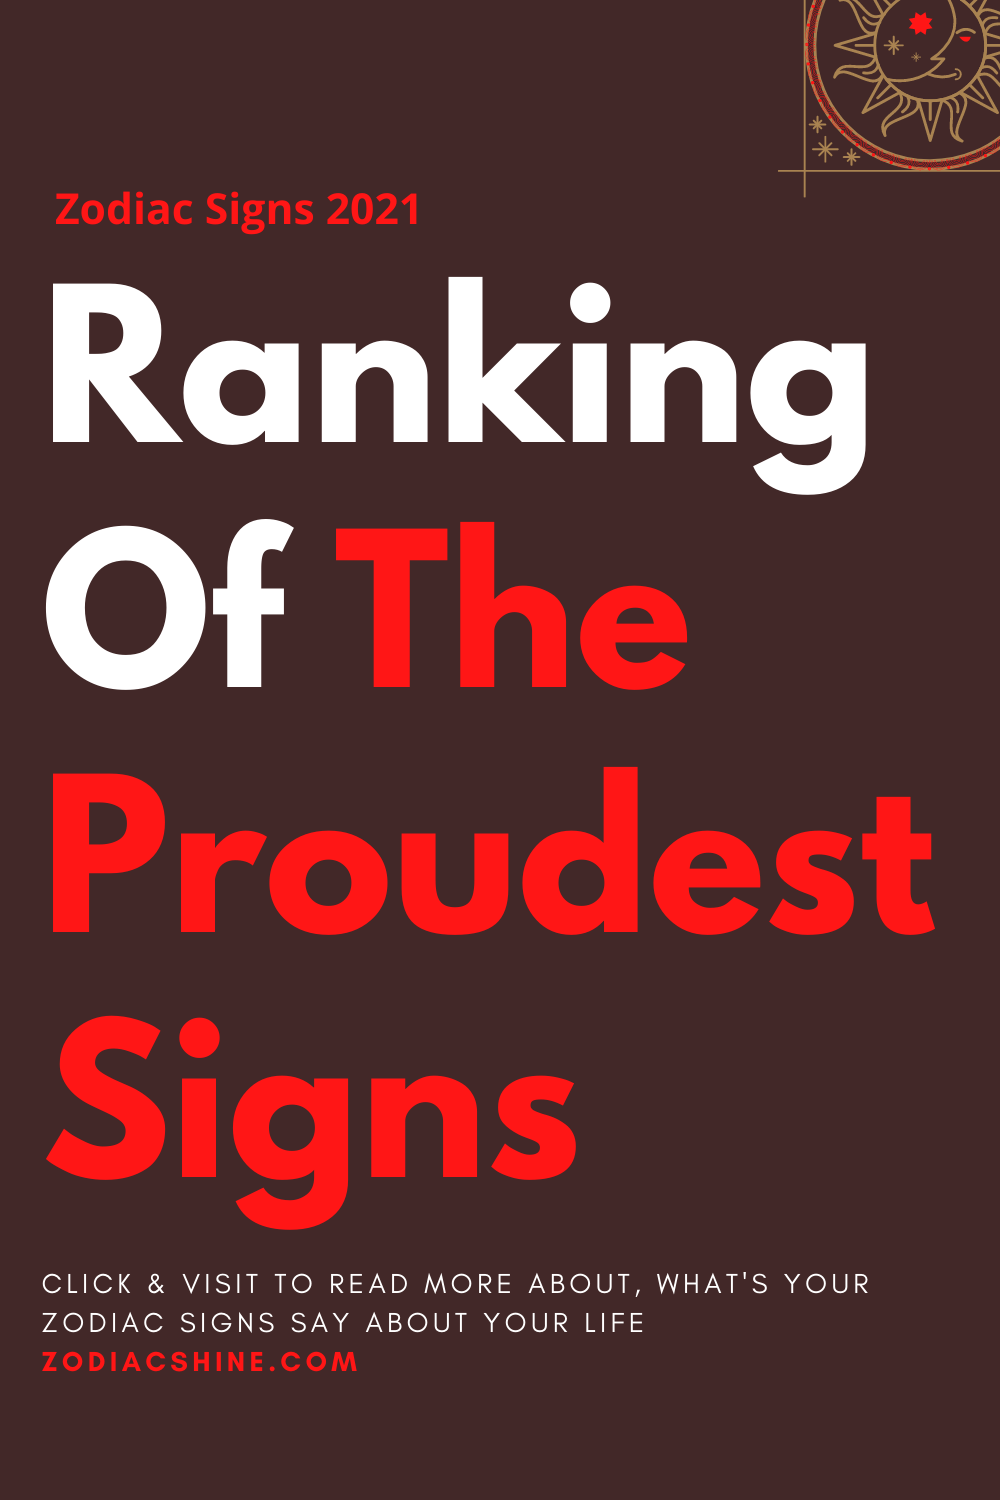 Ranking Of The Most Proudest Signs